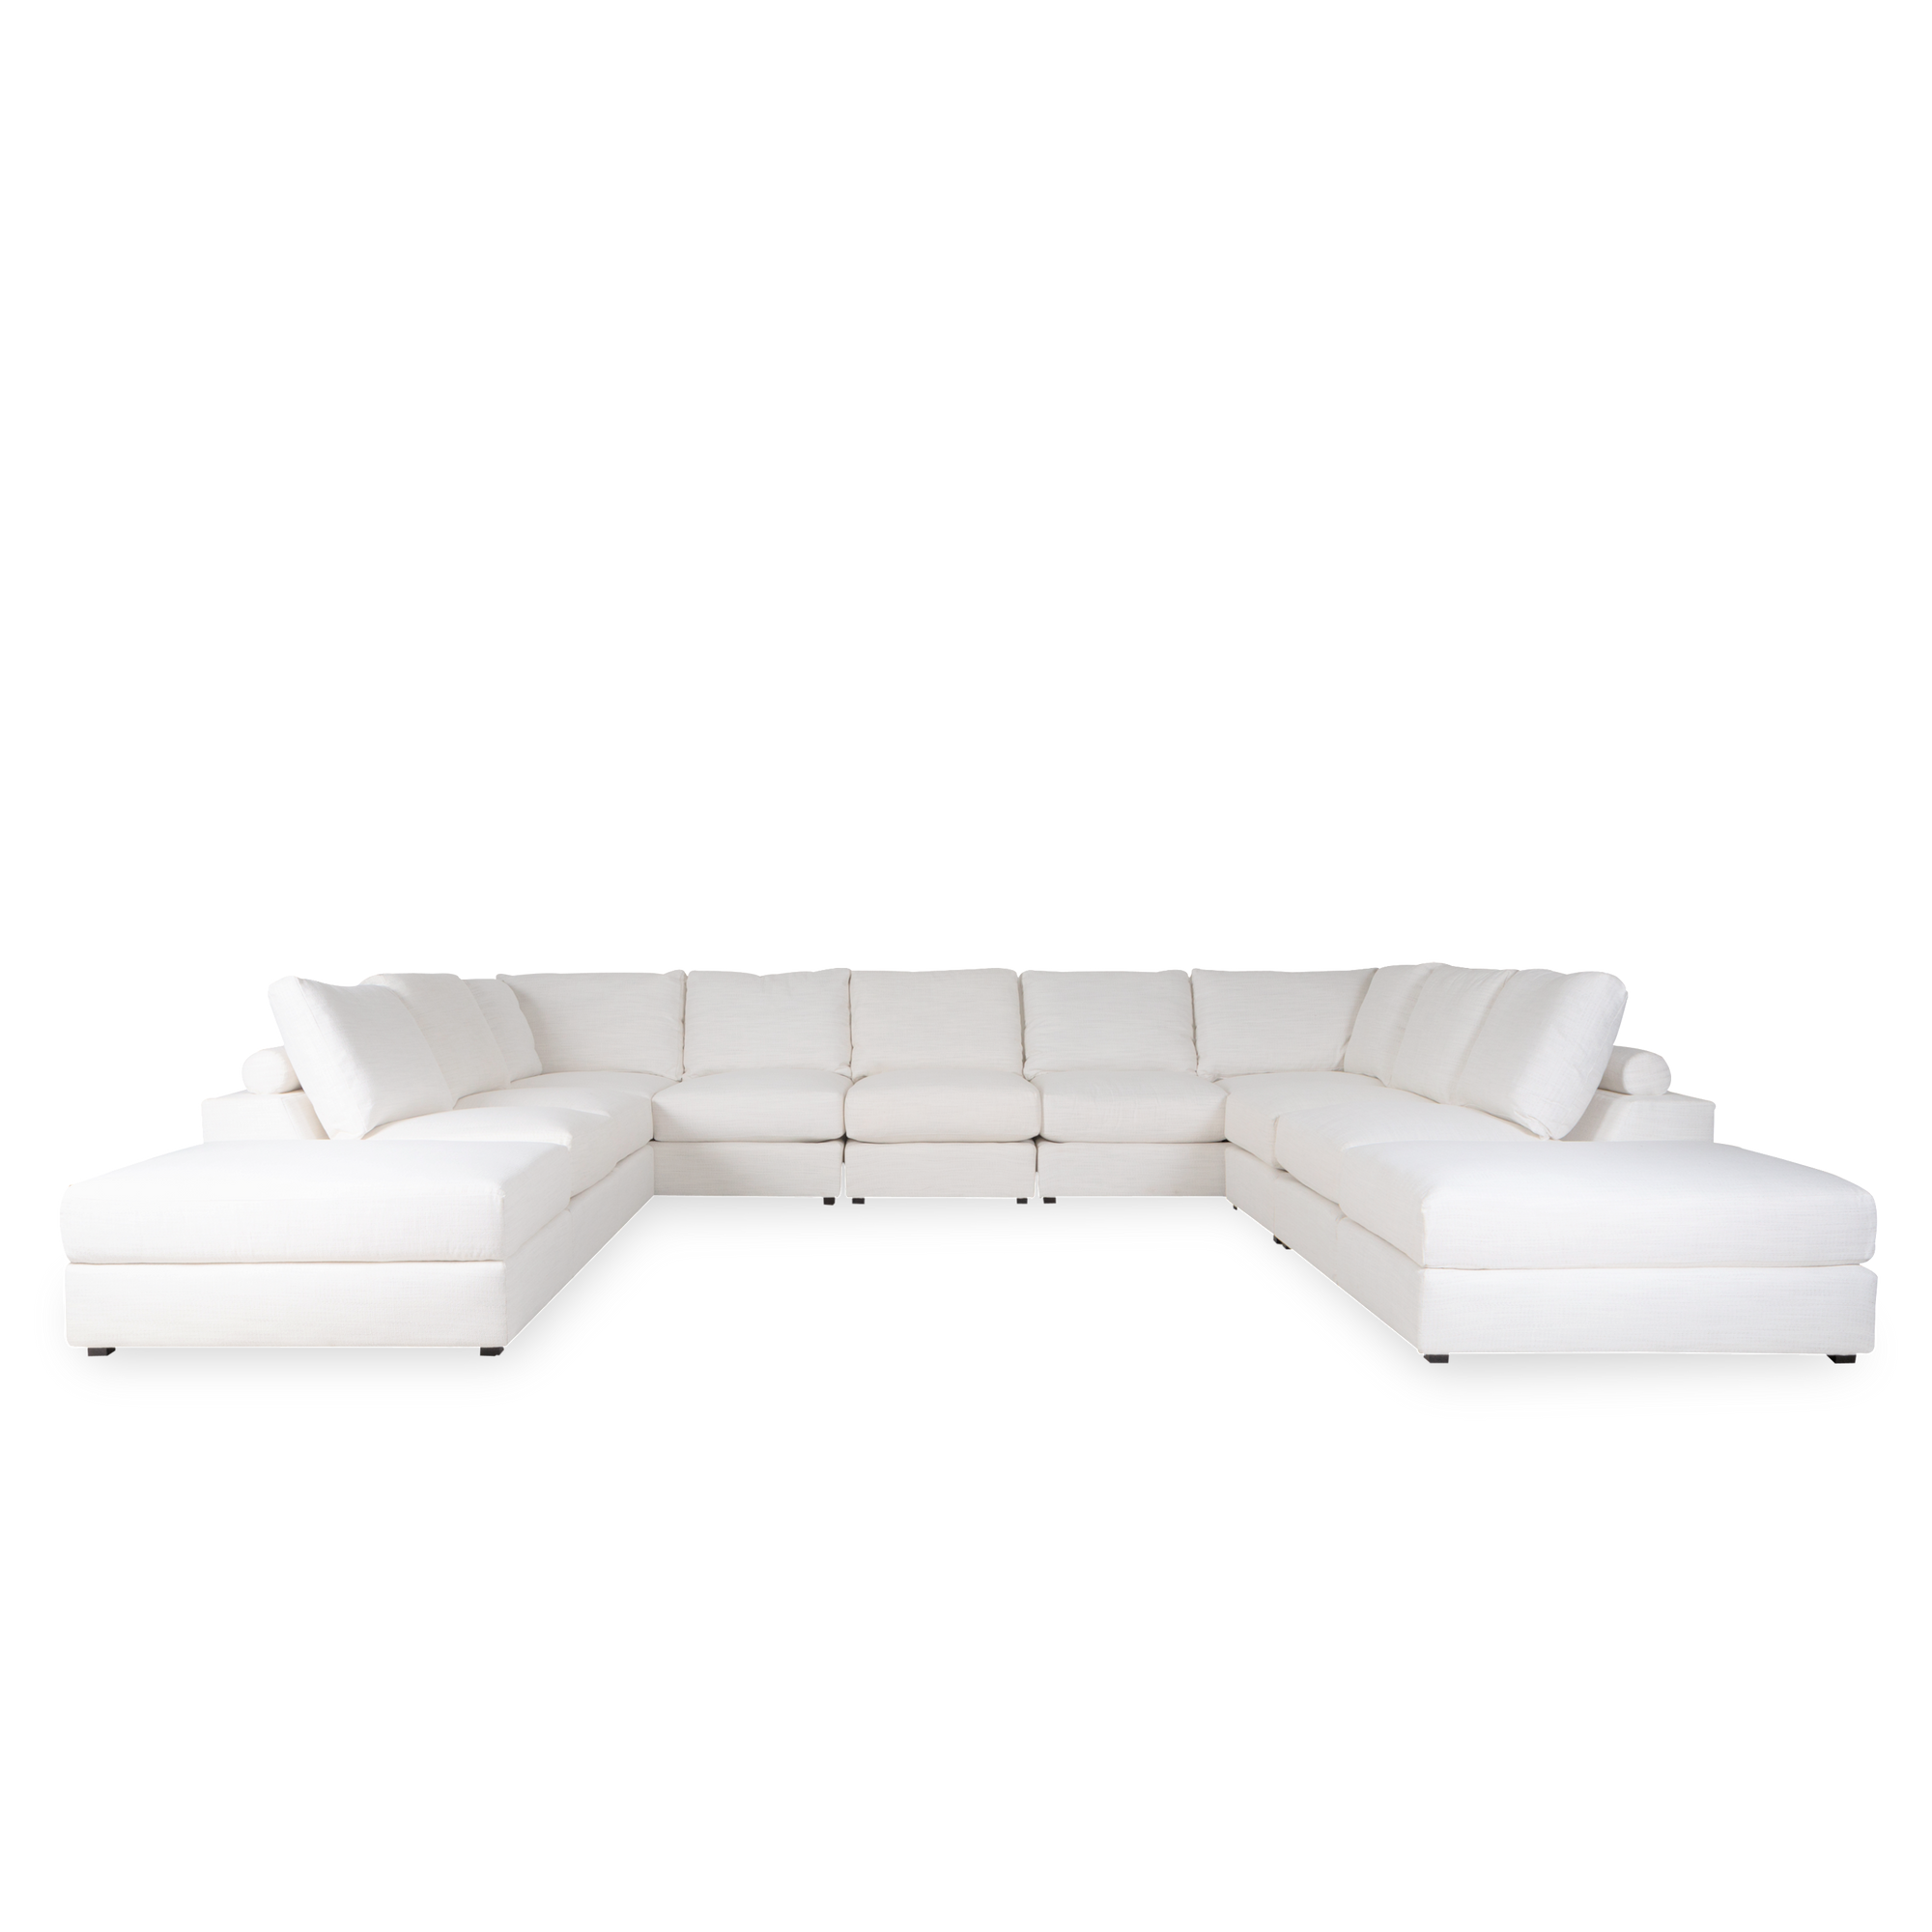 With clean contemporary lines and unparalleled comfort, the Lucca Modular Sectional offers high sophistication to casual lounging.